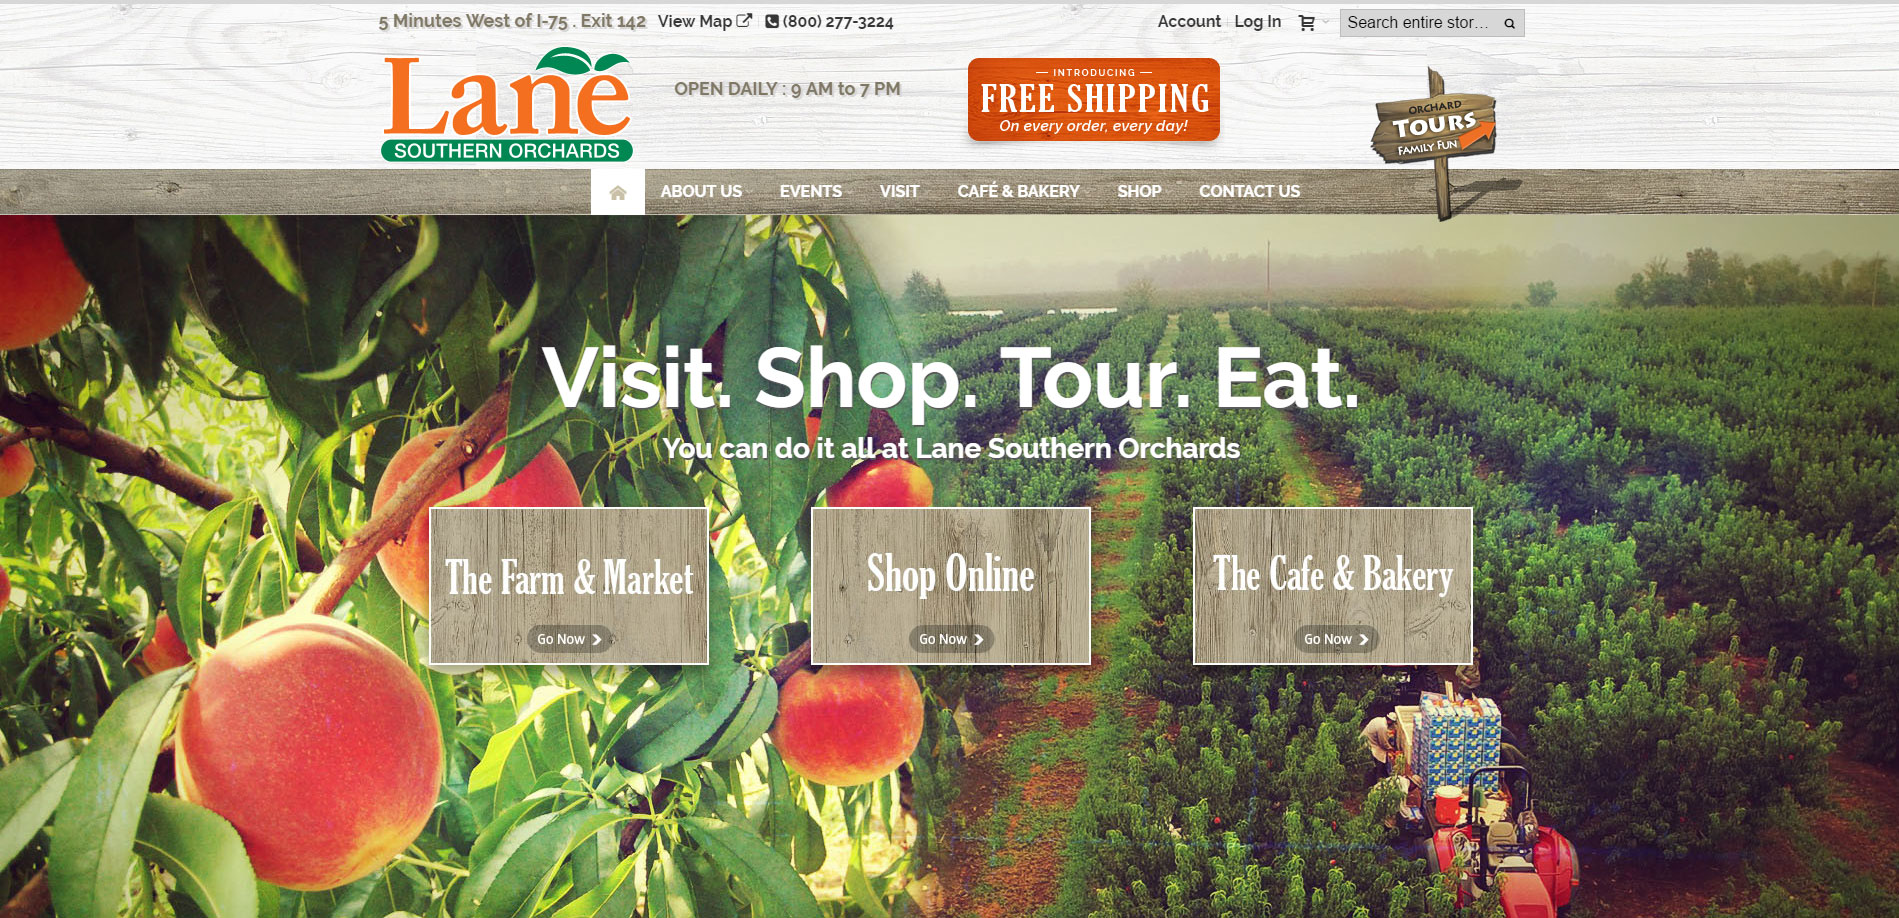 Lane Southern Orchards Website Goes Live